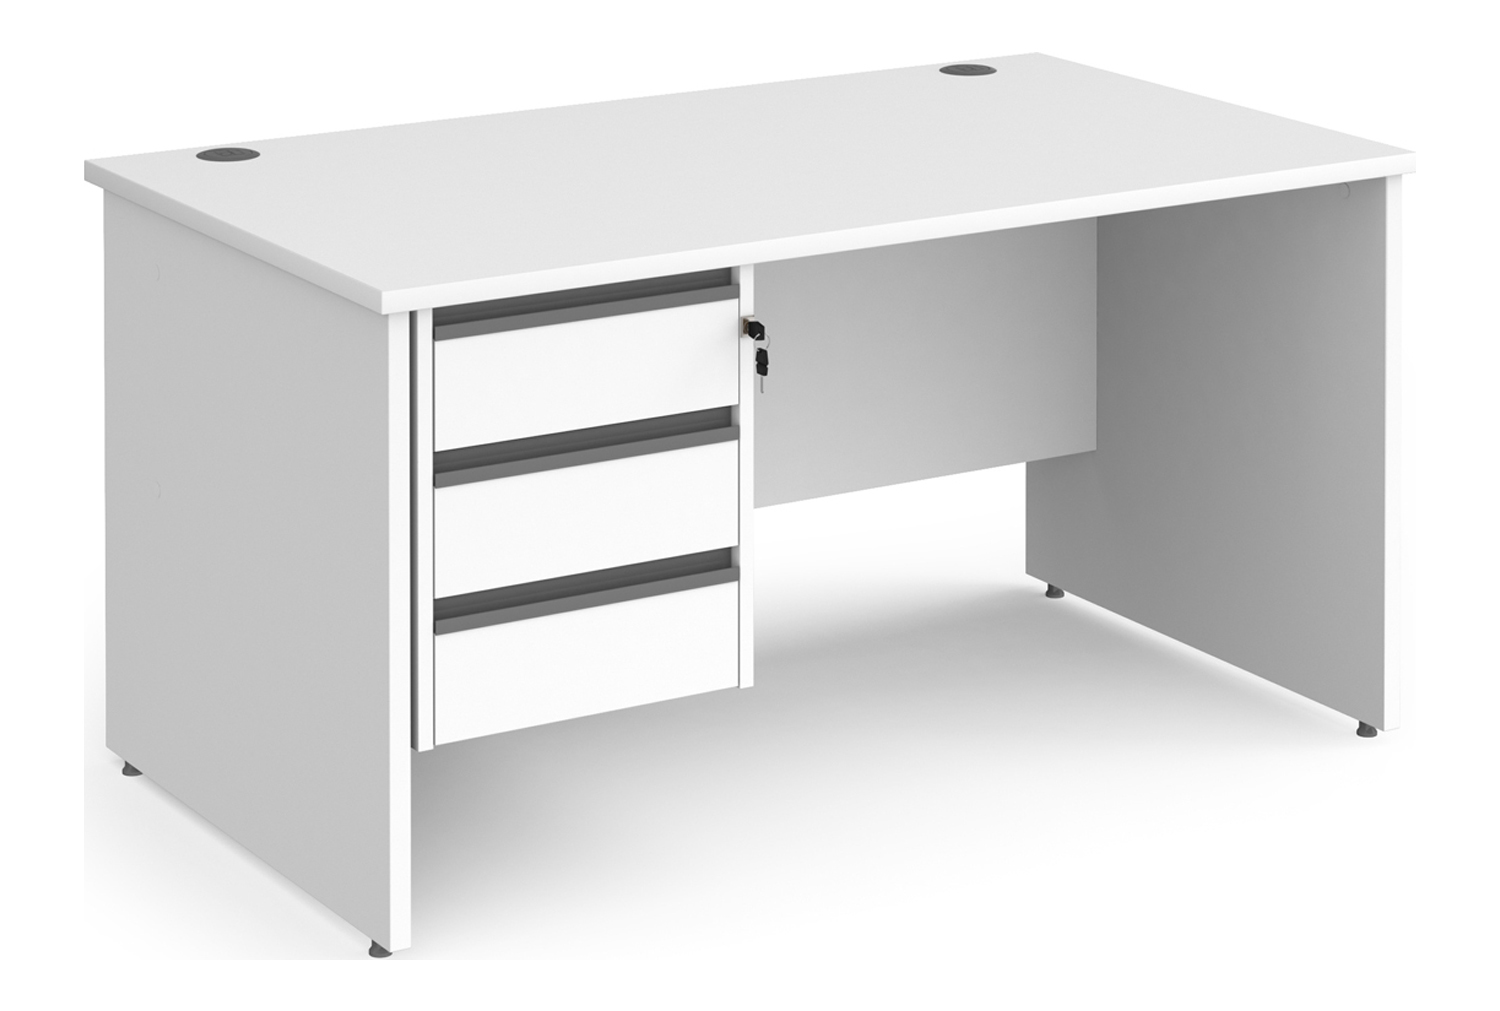 Value Line Classic+ Panel End Office Desk 3 Drawers (Graphite Slats), 140wx80dx73h (cm), White, Express Delivery